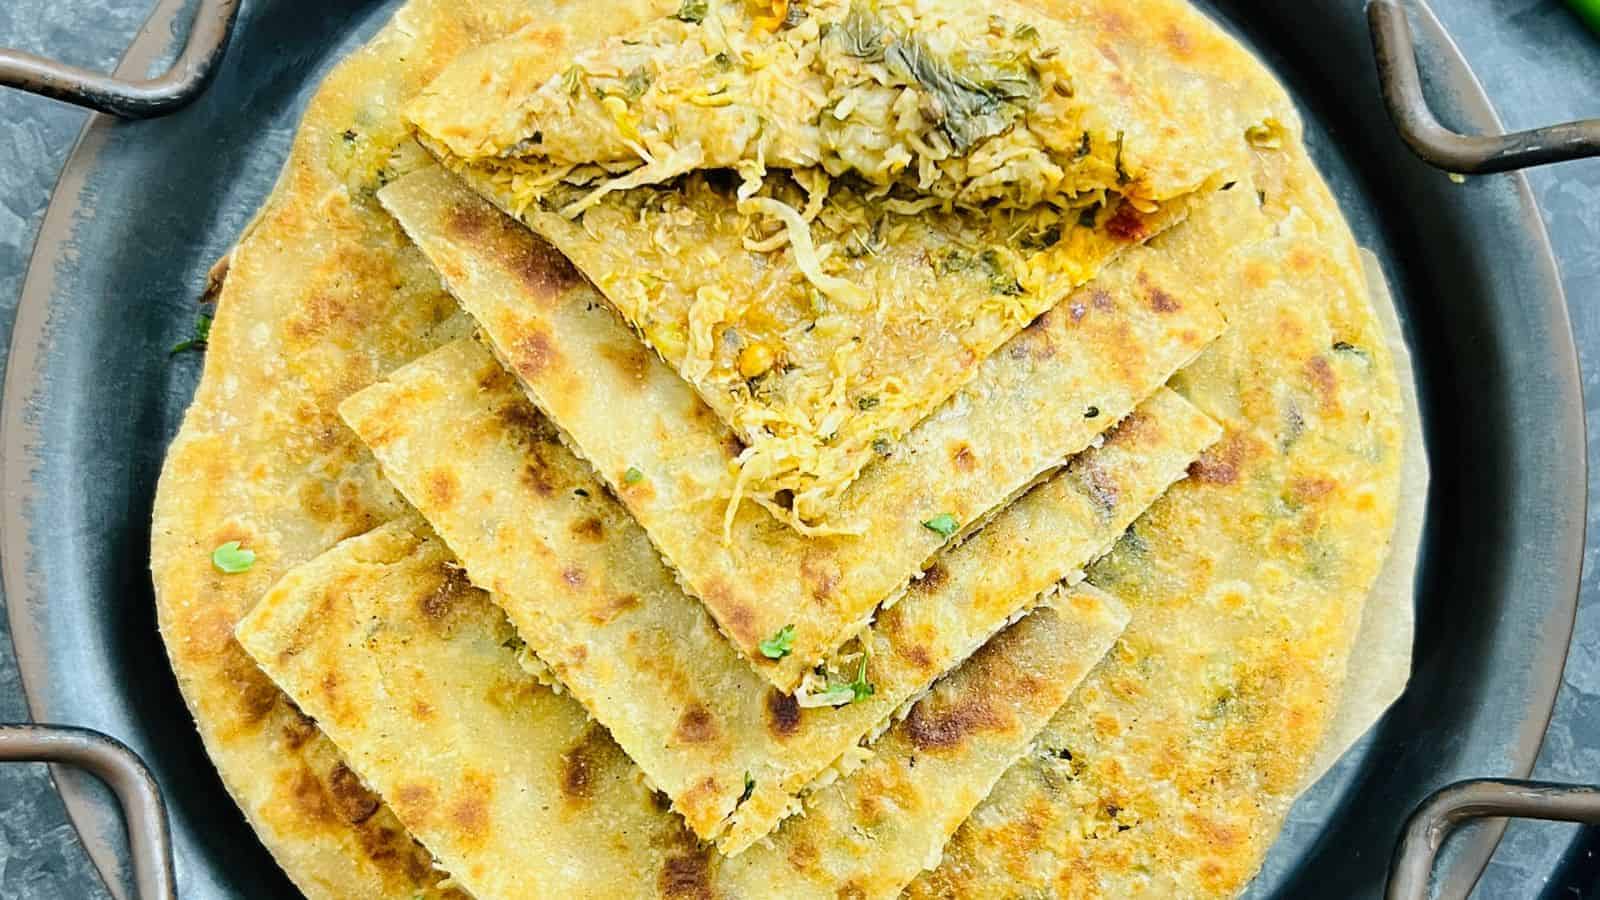 Close-up of stuffed parathas on a stovetop, filled with spiced vegetables, garnished with cilantro, cooked to a golden crisp.